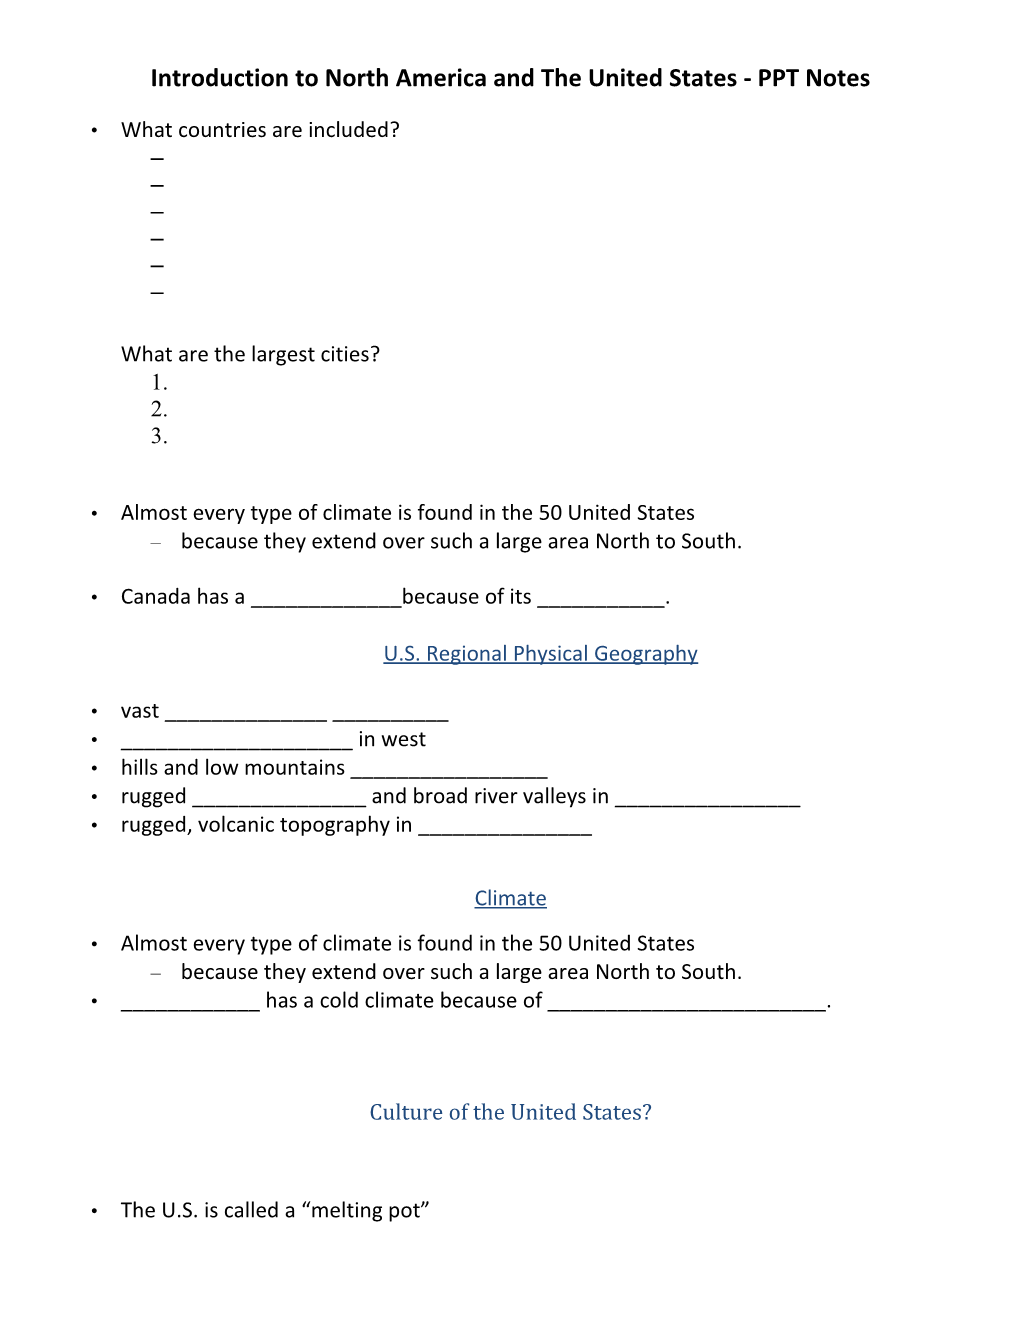 Introduction to North America and the United States - PPT Notes